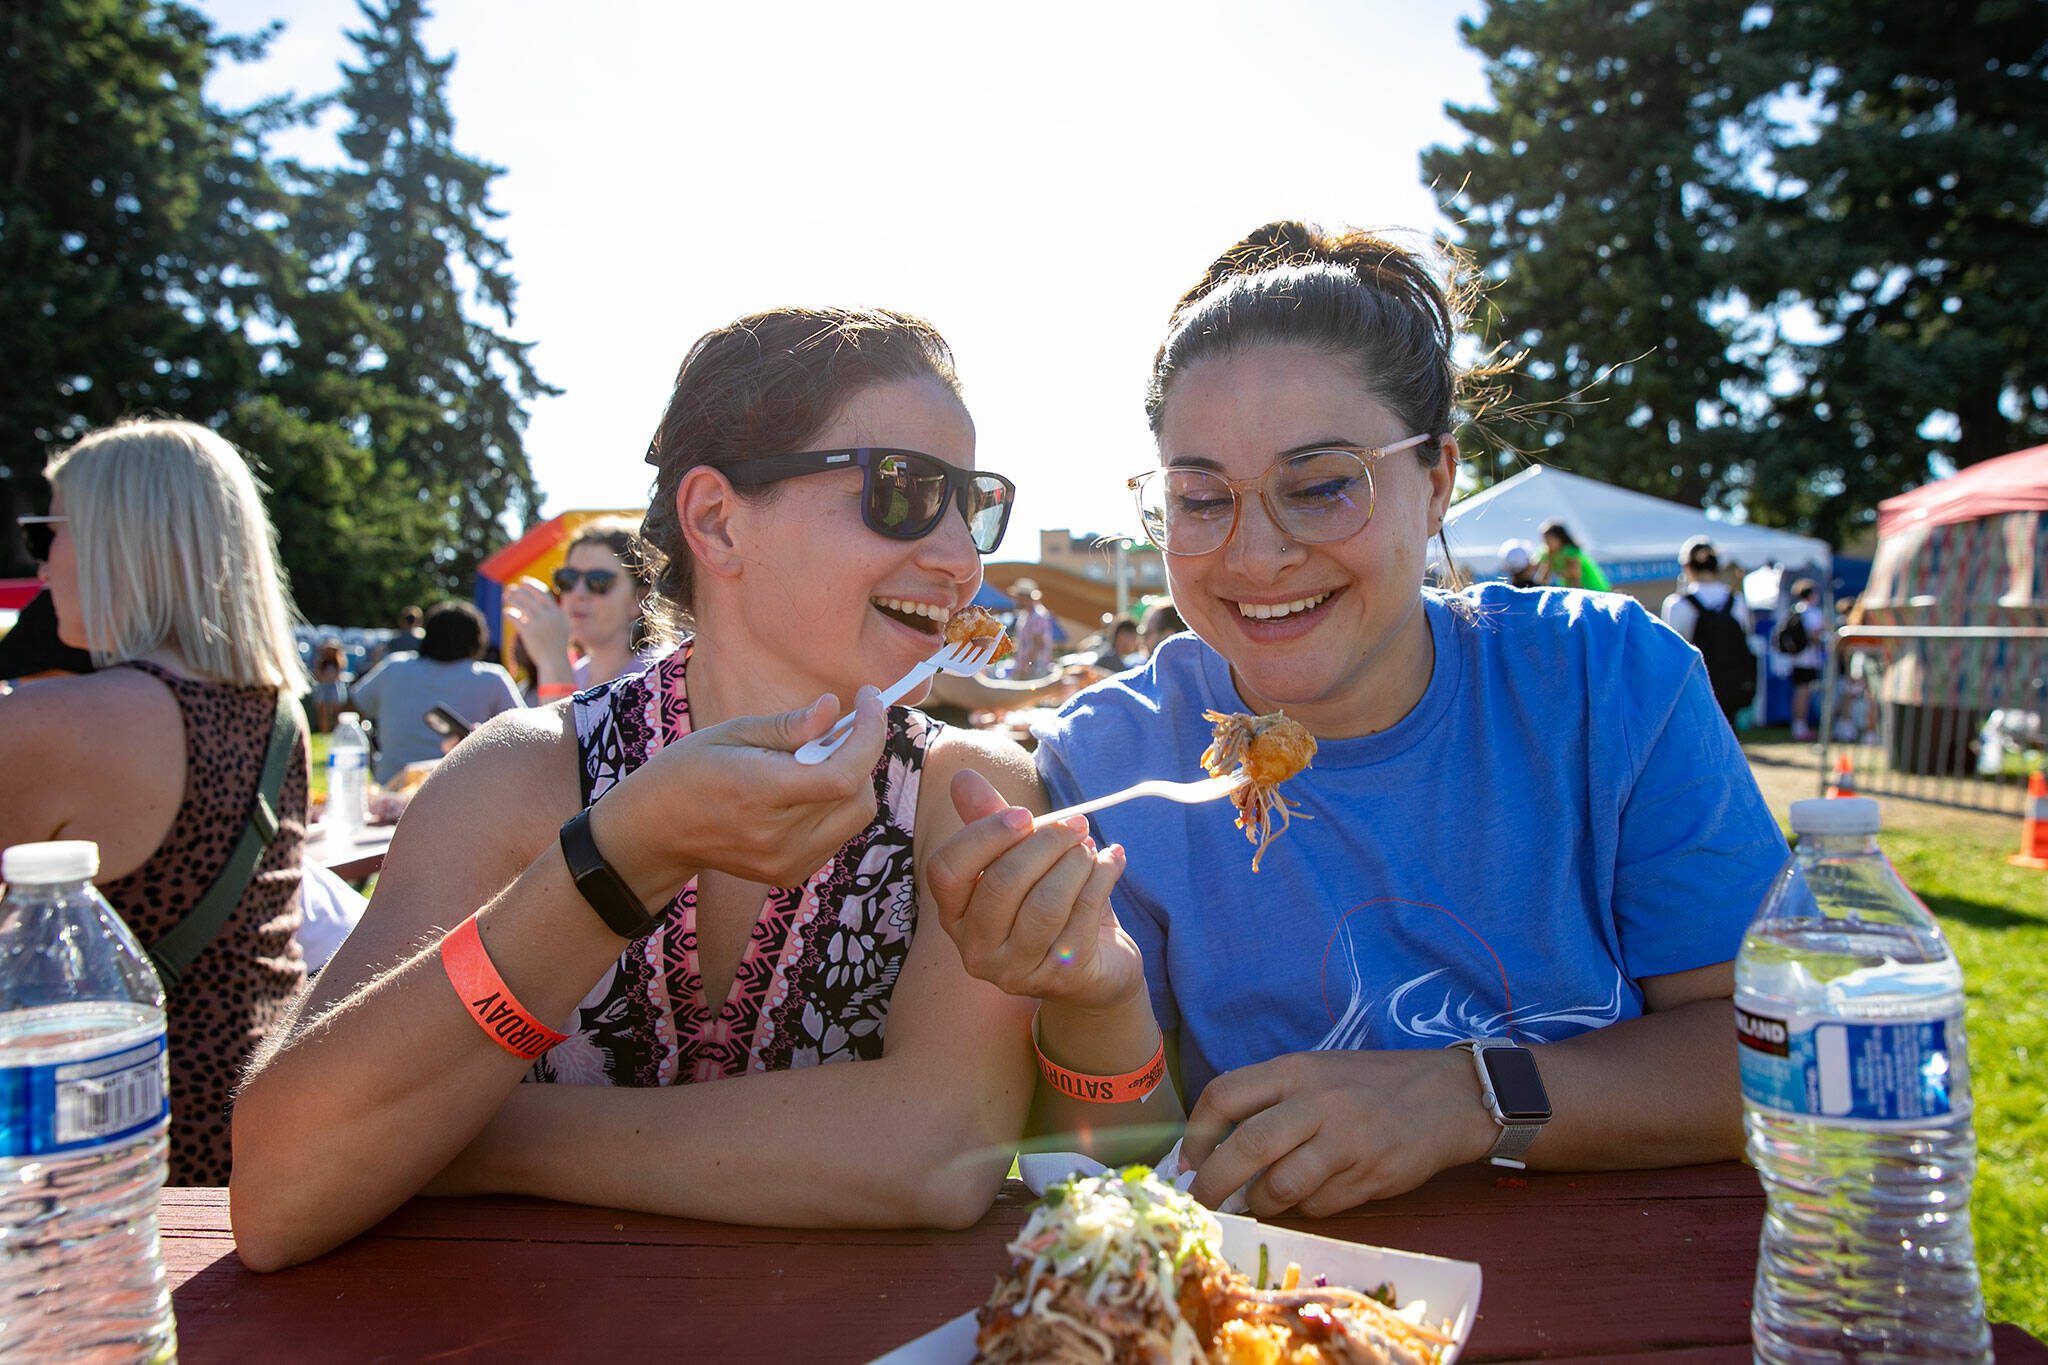 Sisters Nadia, left, and Yasmeen Kabbani dig into some pulled pork tater tots from Ryan’s REZ-ipes during Taste Edmonds on Saturday, August 12, 2023, at Franceós Anderson Play Field in Edmonds, Washington. (Ryan Berry / The Herald)